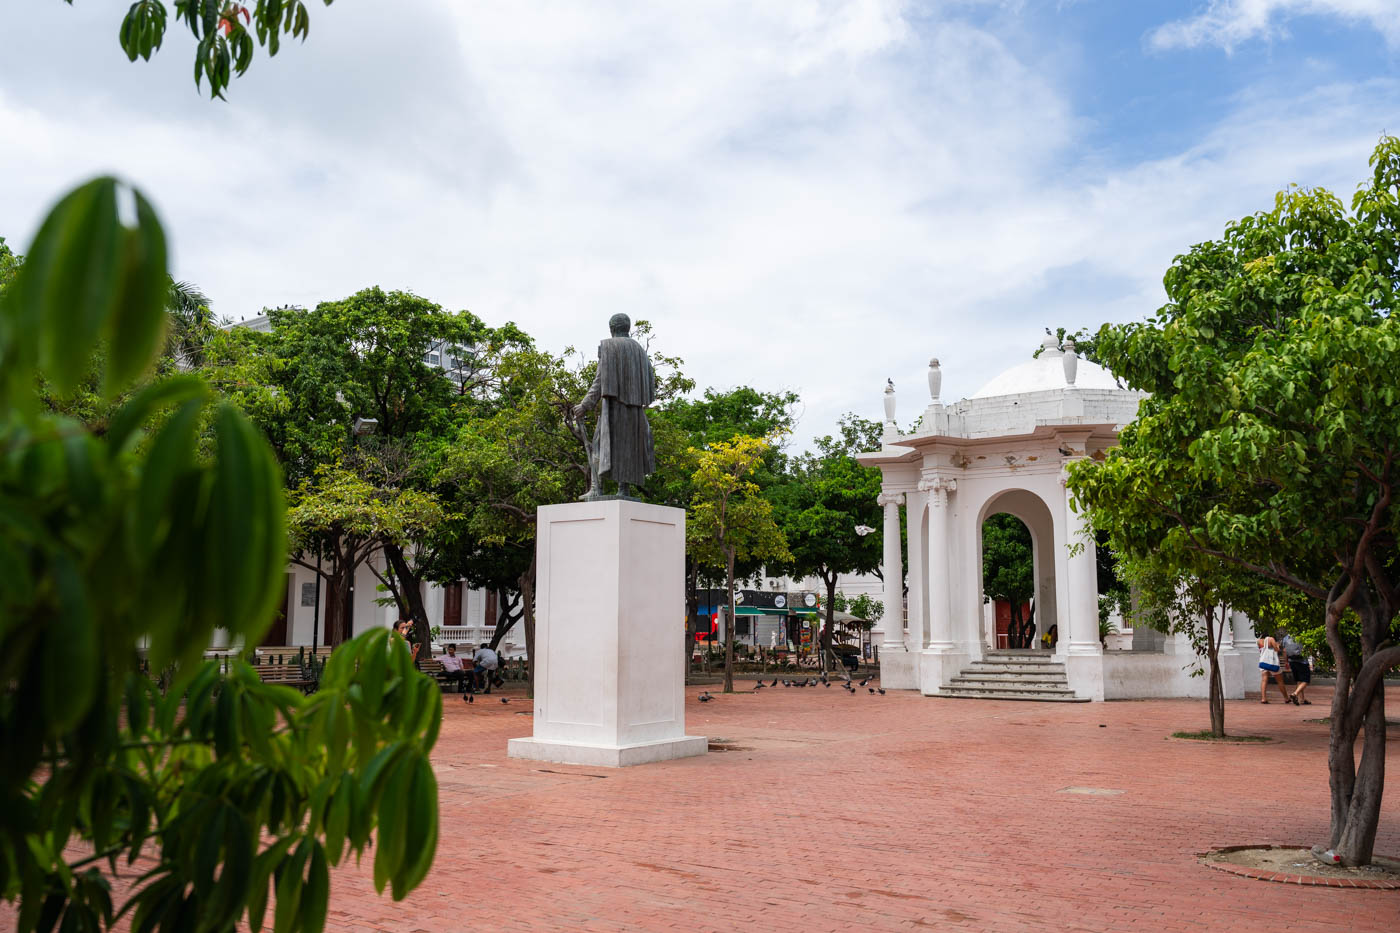 Looking across Parque de los Novios to a white, ornate bandstand and a bronze statue of Santander framed by trees.